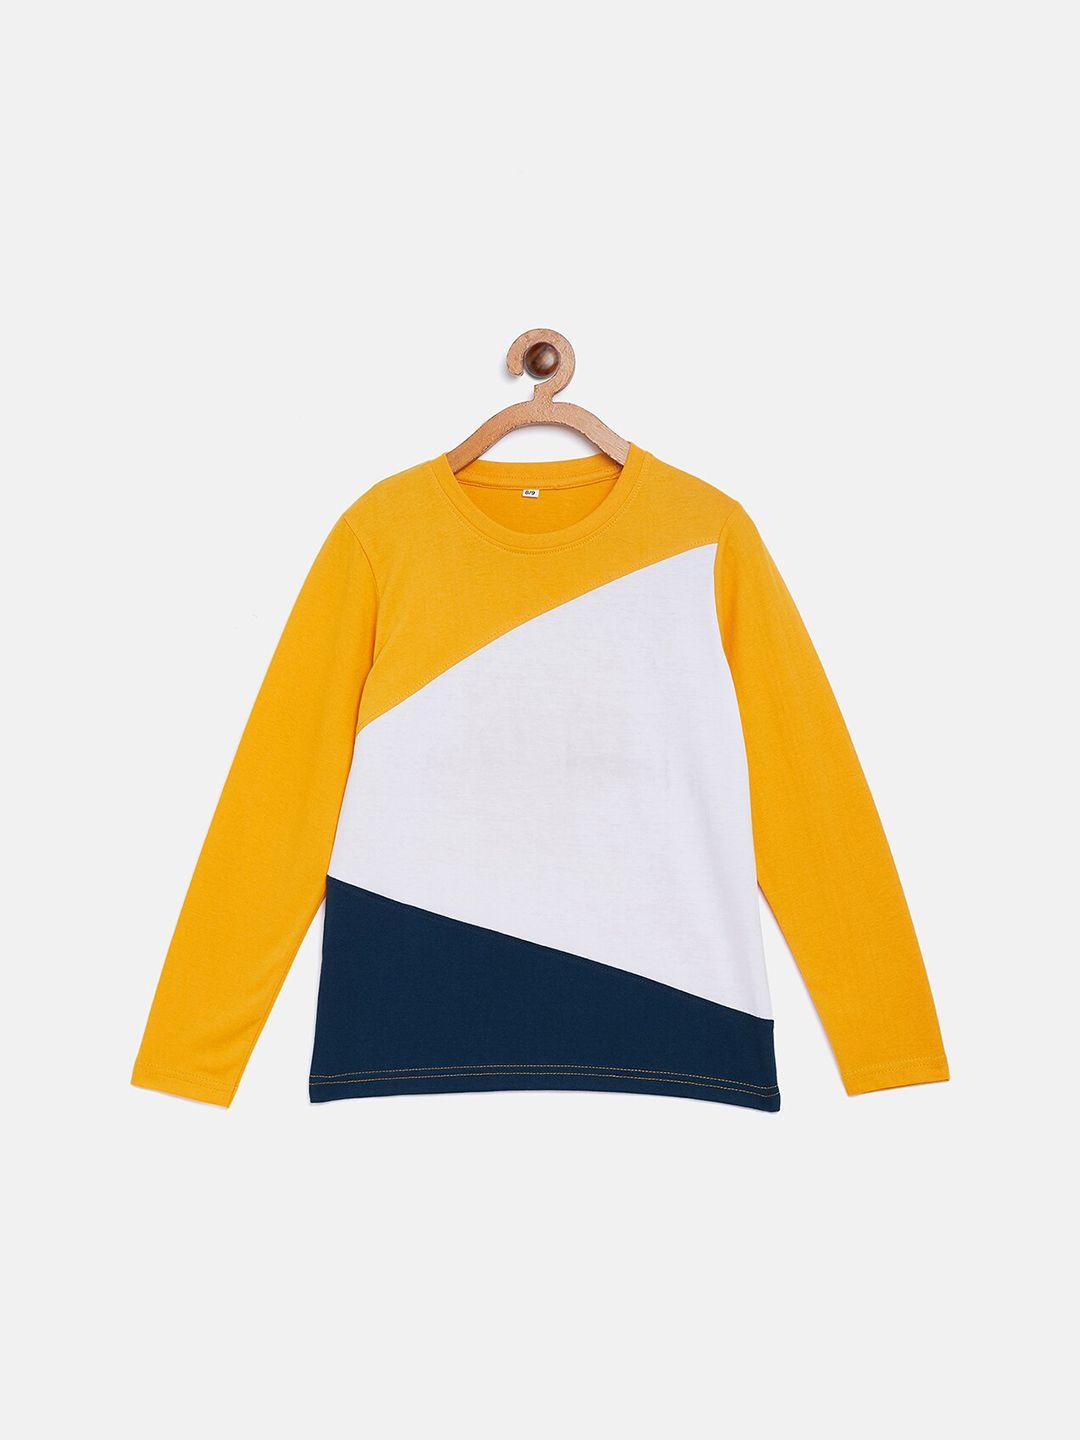 lilclan - by the dry state boys yellow & white colourblocked t-shirt